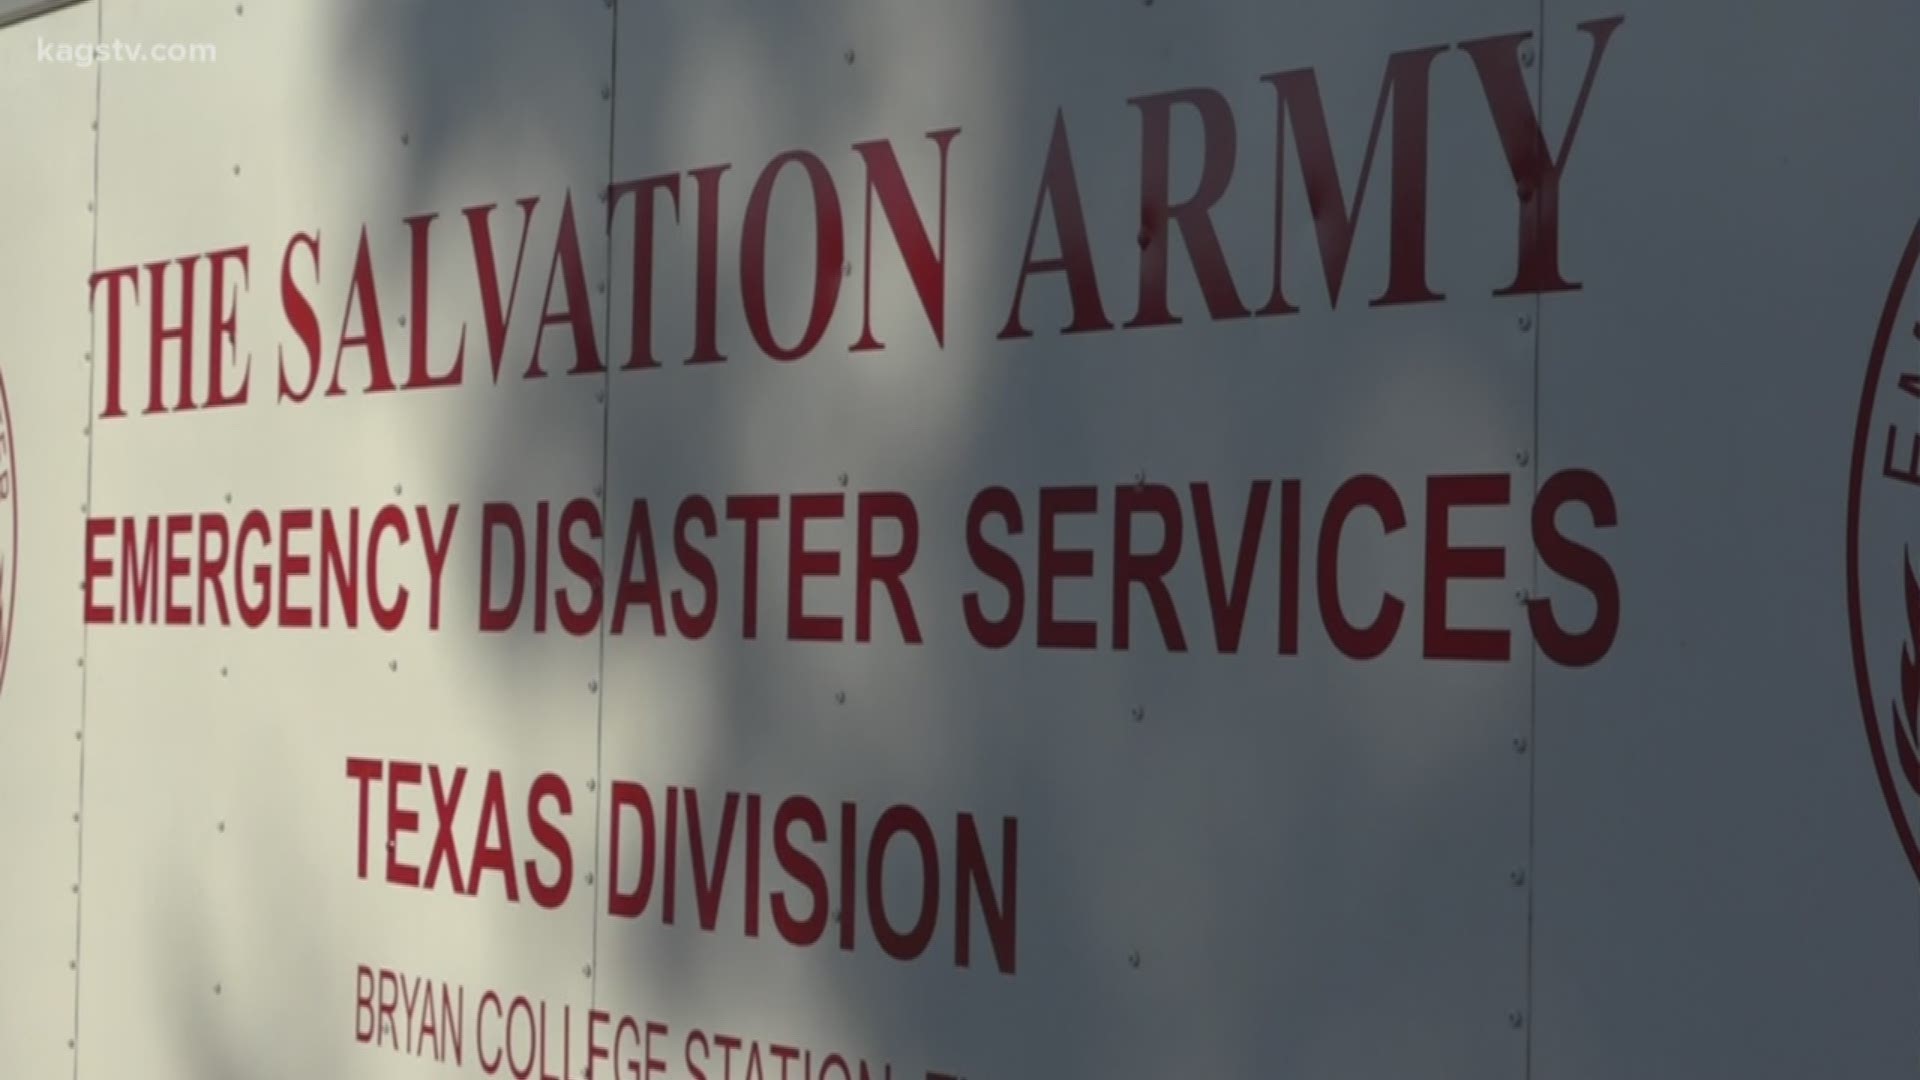 The salvation army of Bryan-College station is sending their emergency disaster team to Winnie, Texas, one of the hardest hit areas by Imelda.